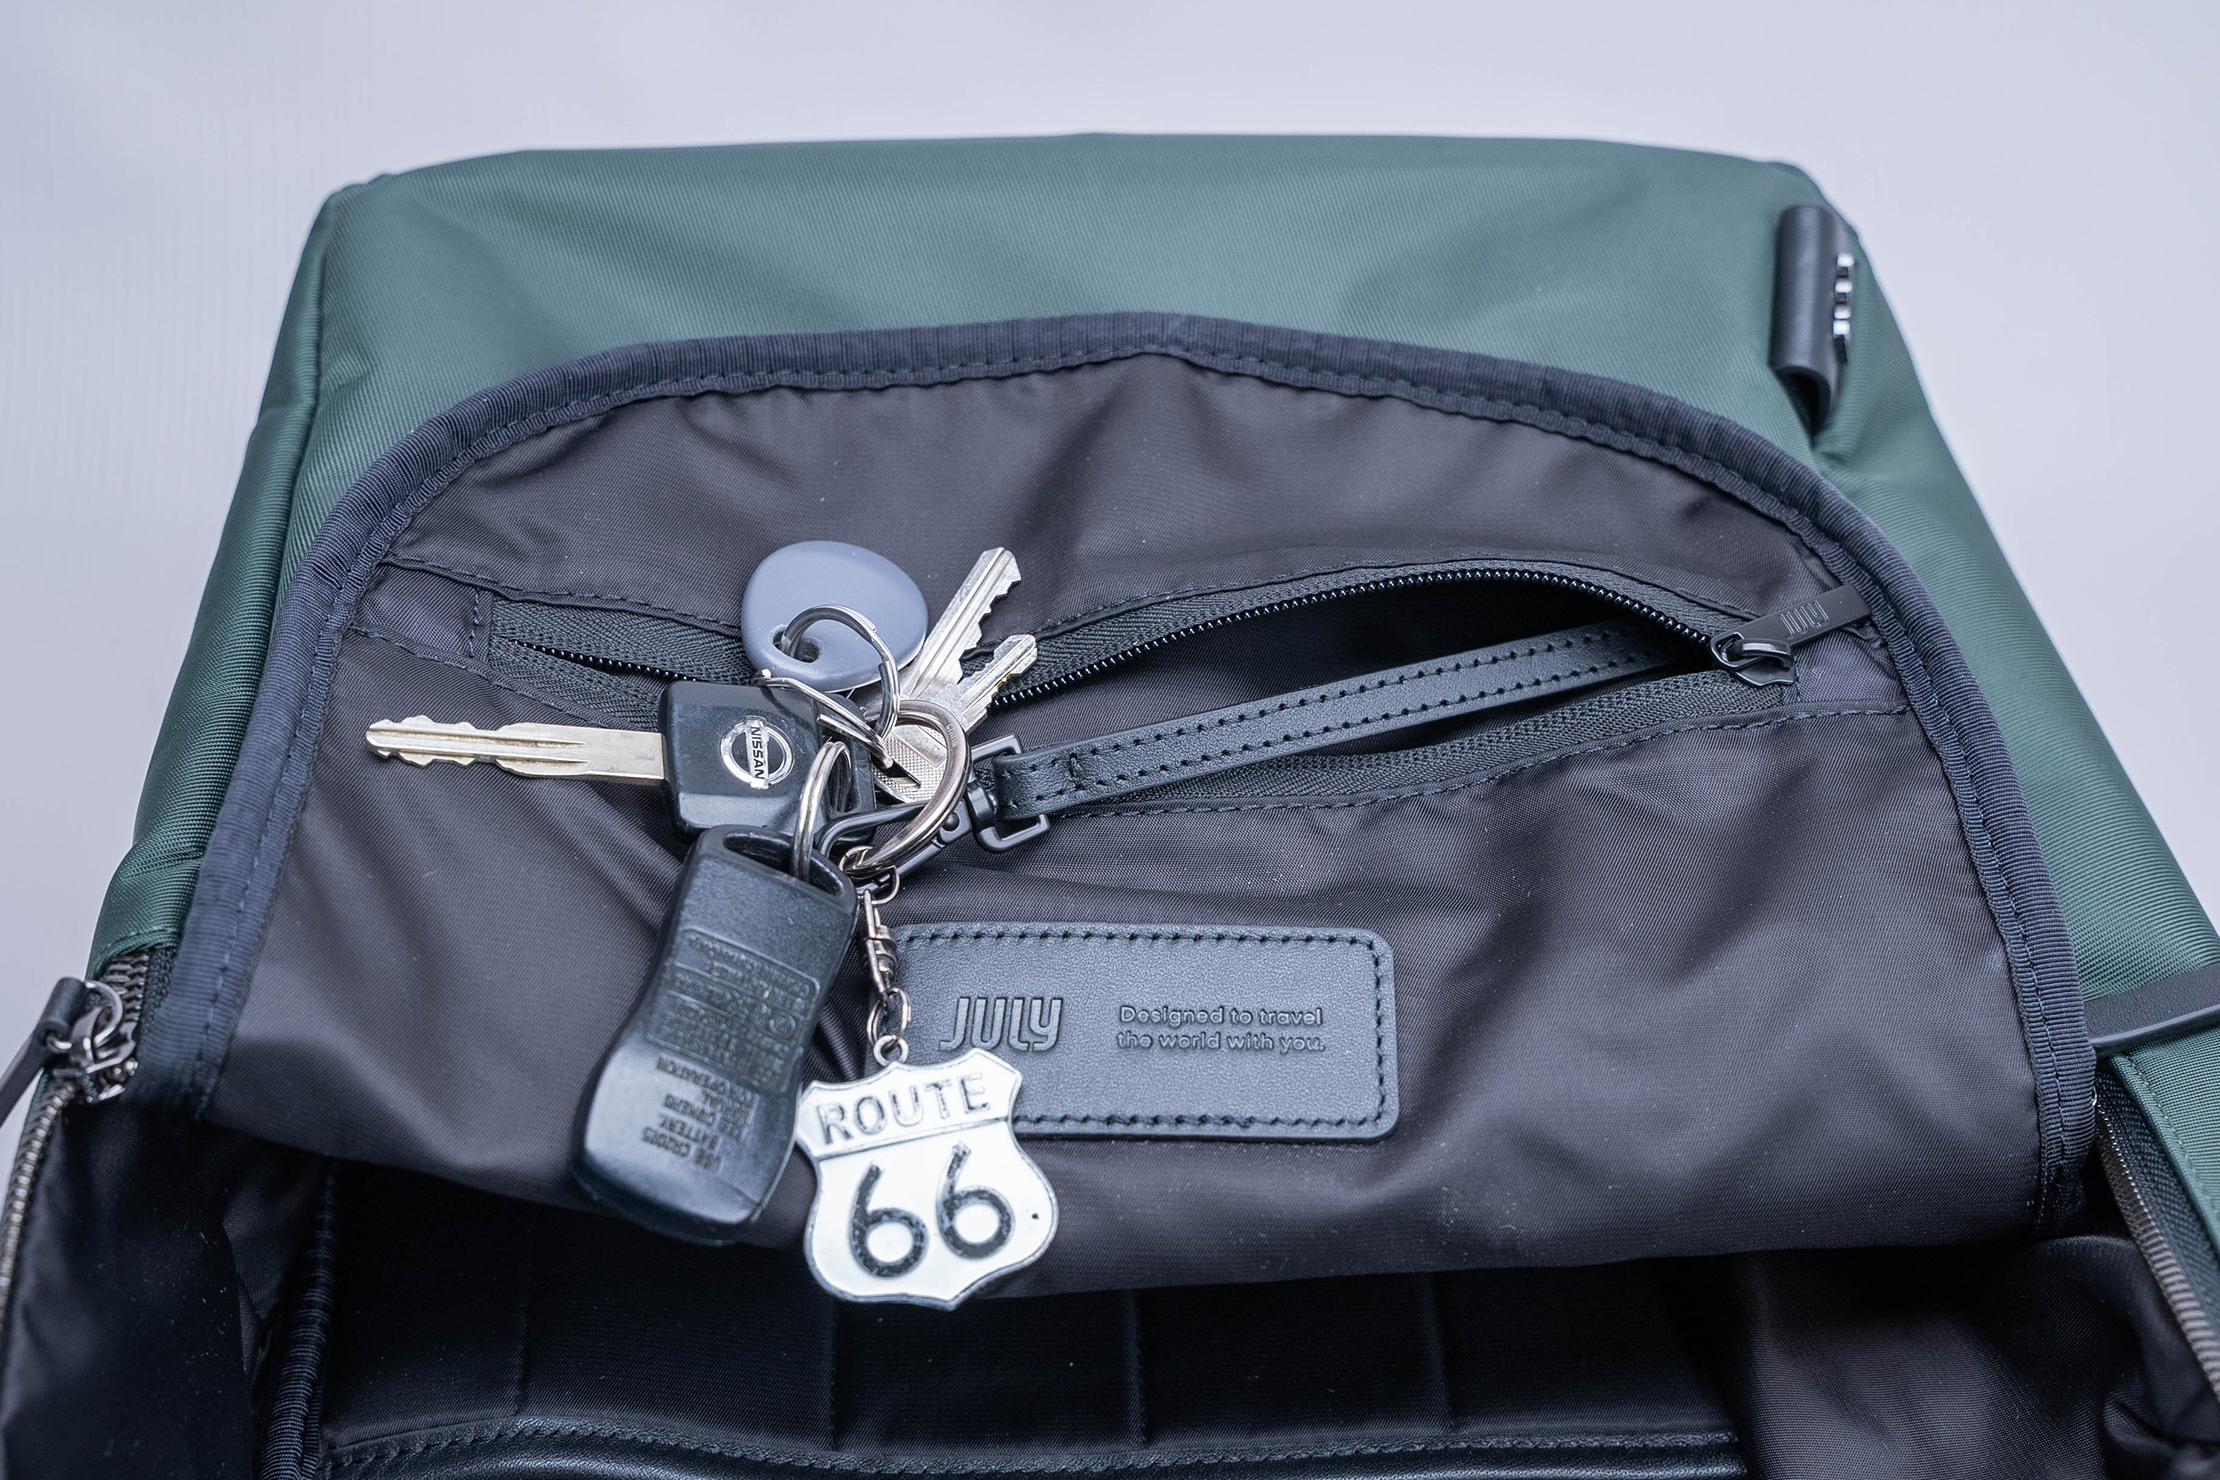 July Carry All Backpack Key Leash